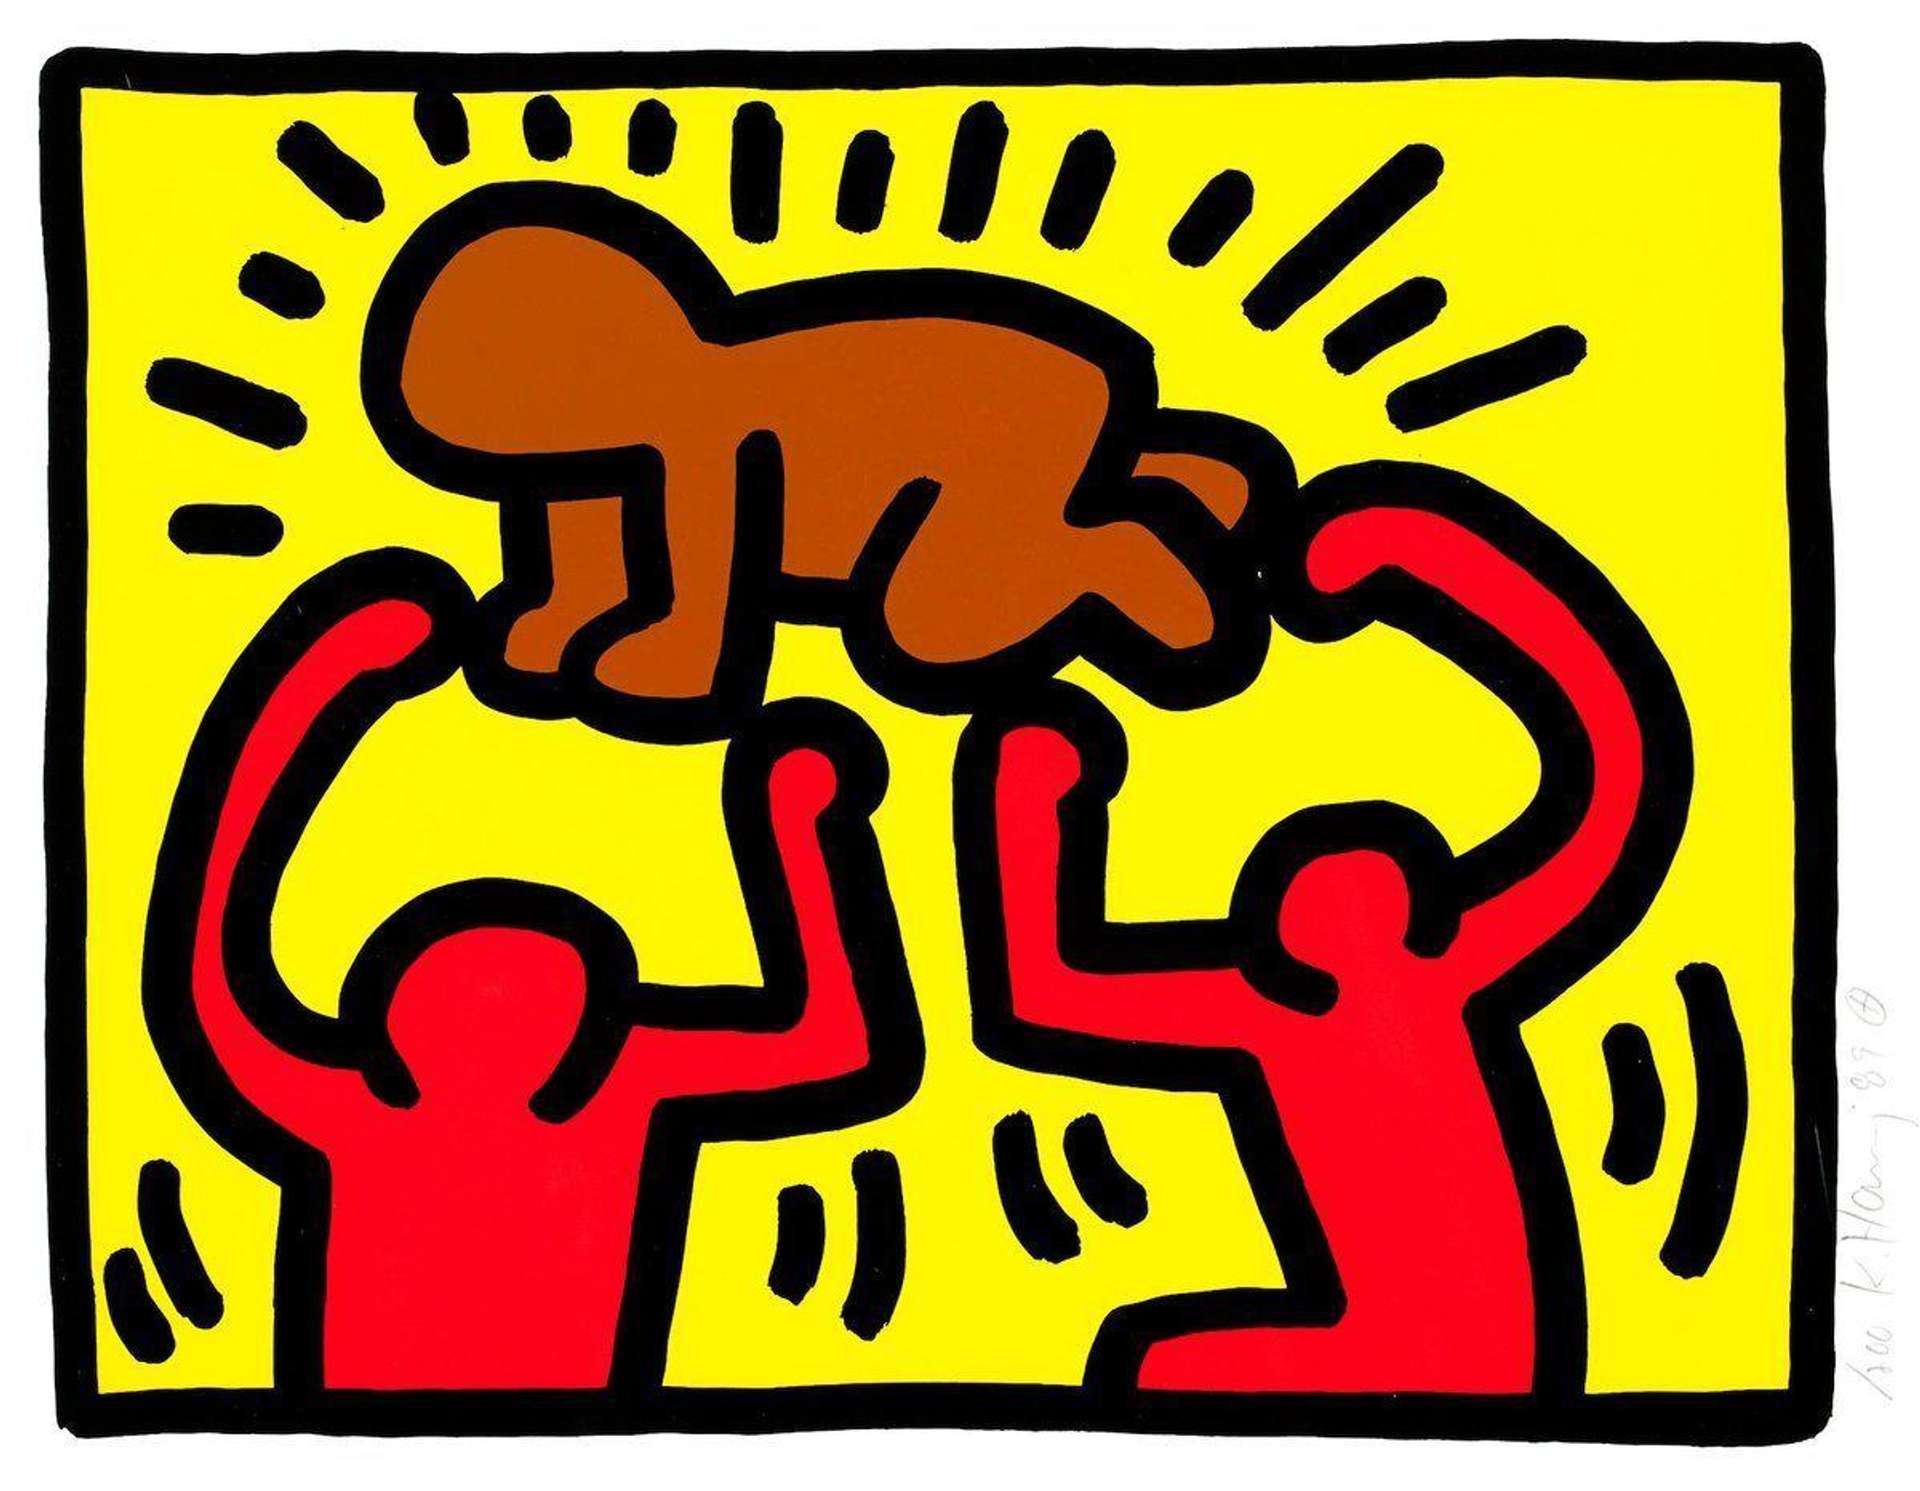 A screenprint by Keith Haring depicting two red cartoon figures holding up a brown Radiant Baby figure against a mustard yellow background.